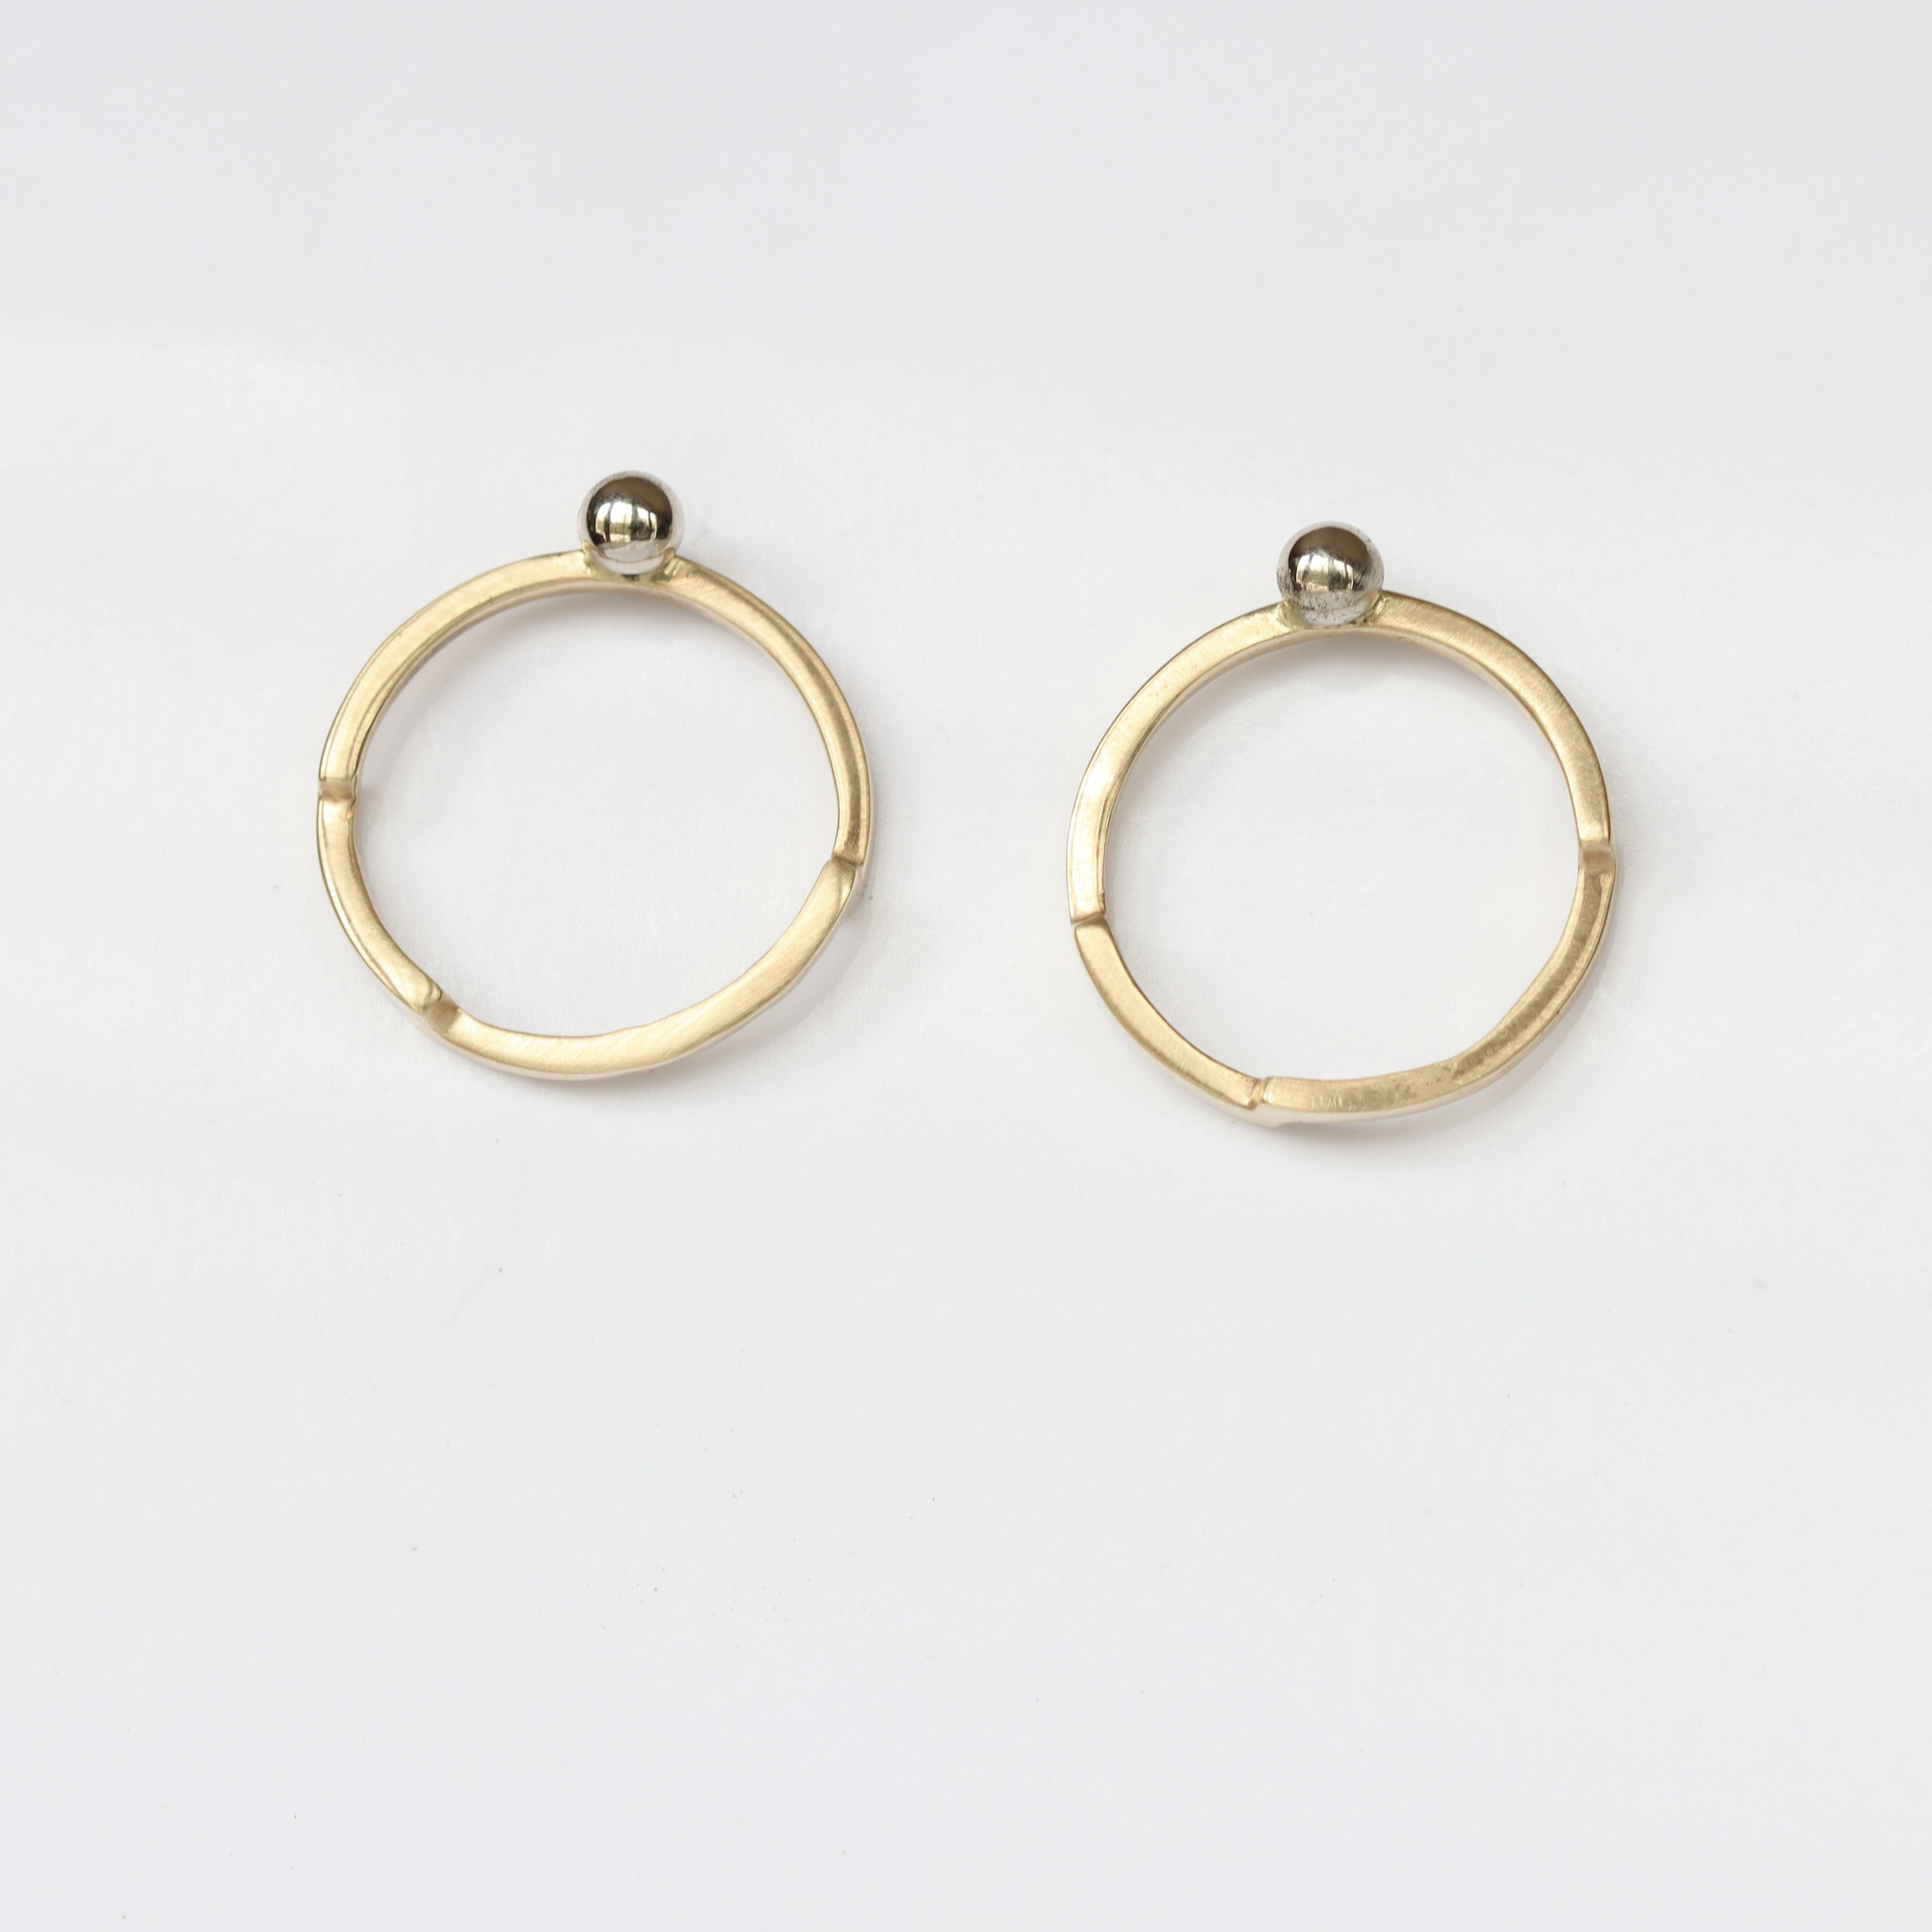 Yellow & White Gold Open Circle Post Earrings - Handcrafted Art Jewelry ...